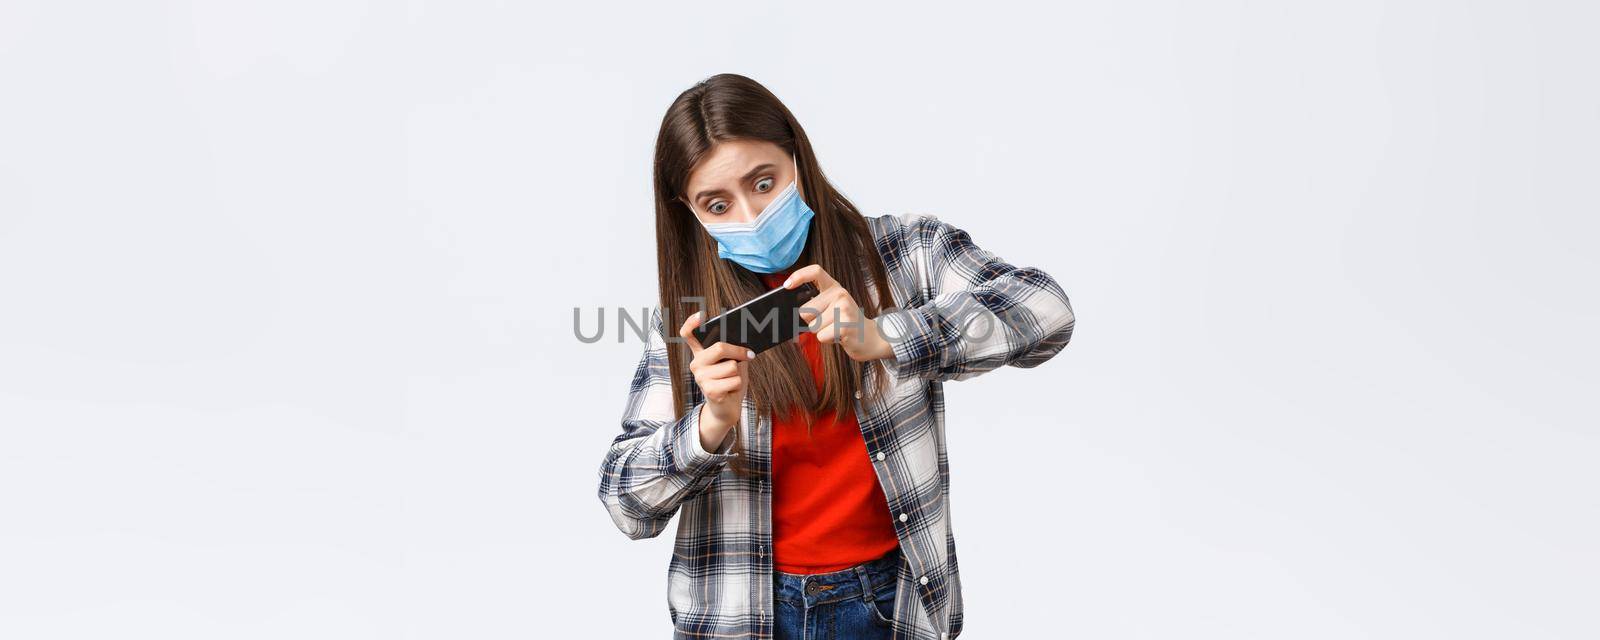 Different emotions, covid-19 pandemic, coronavirus self-quarantine and social distancing concept. Focused and entertained woman in medical mask playing mobile game, tilting body, difficult level.